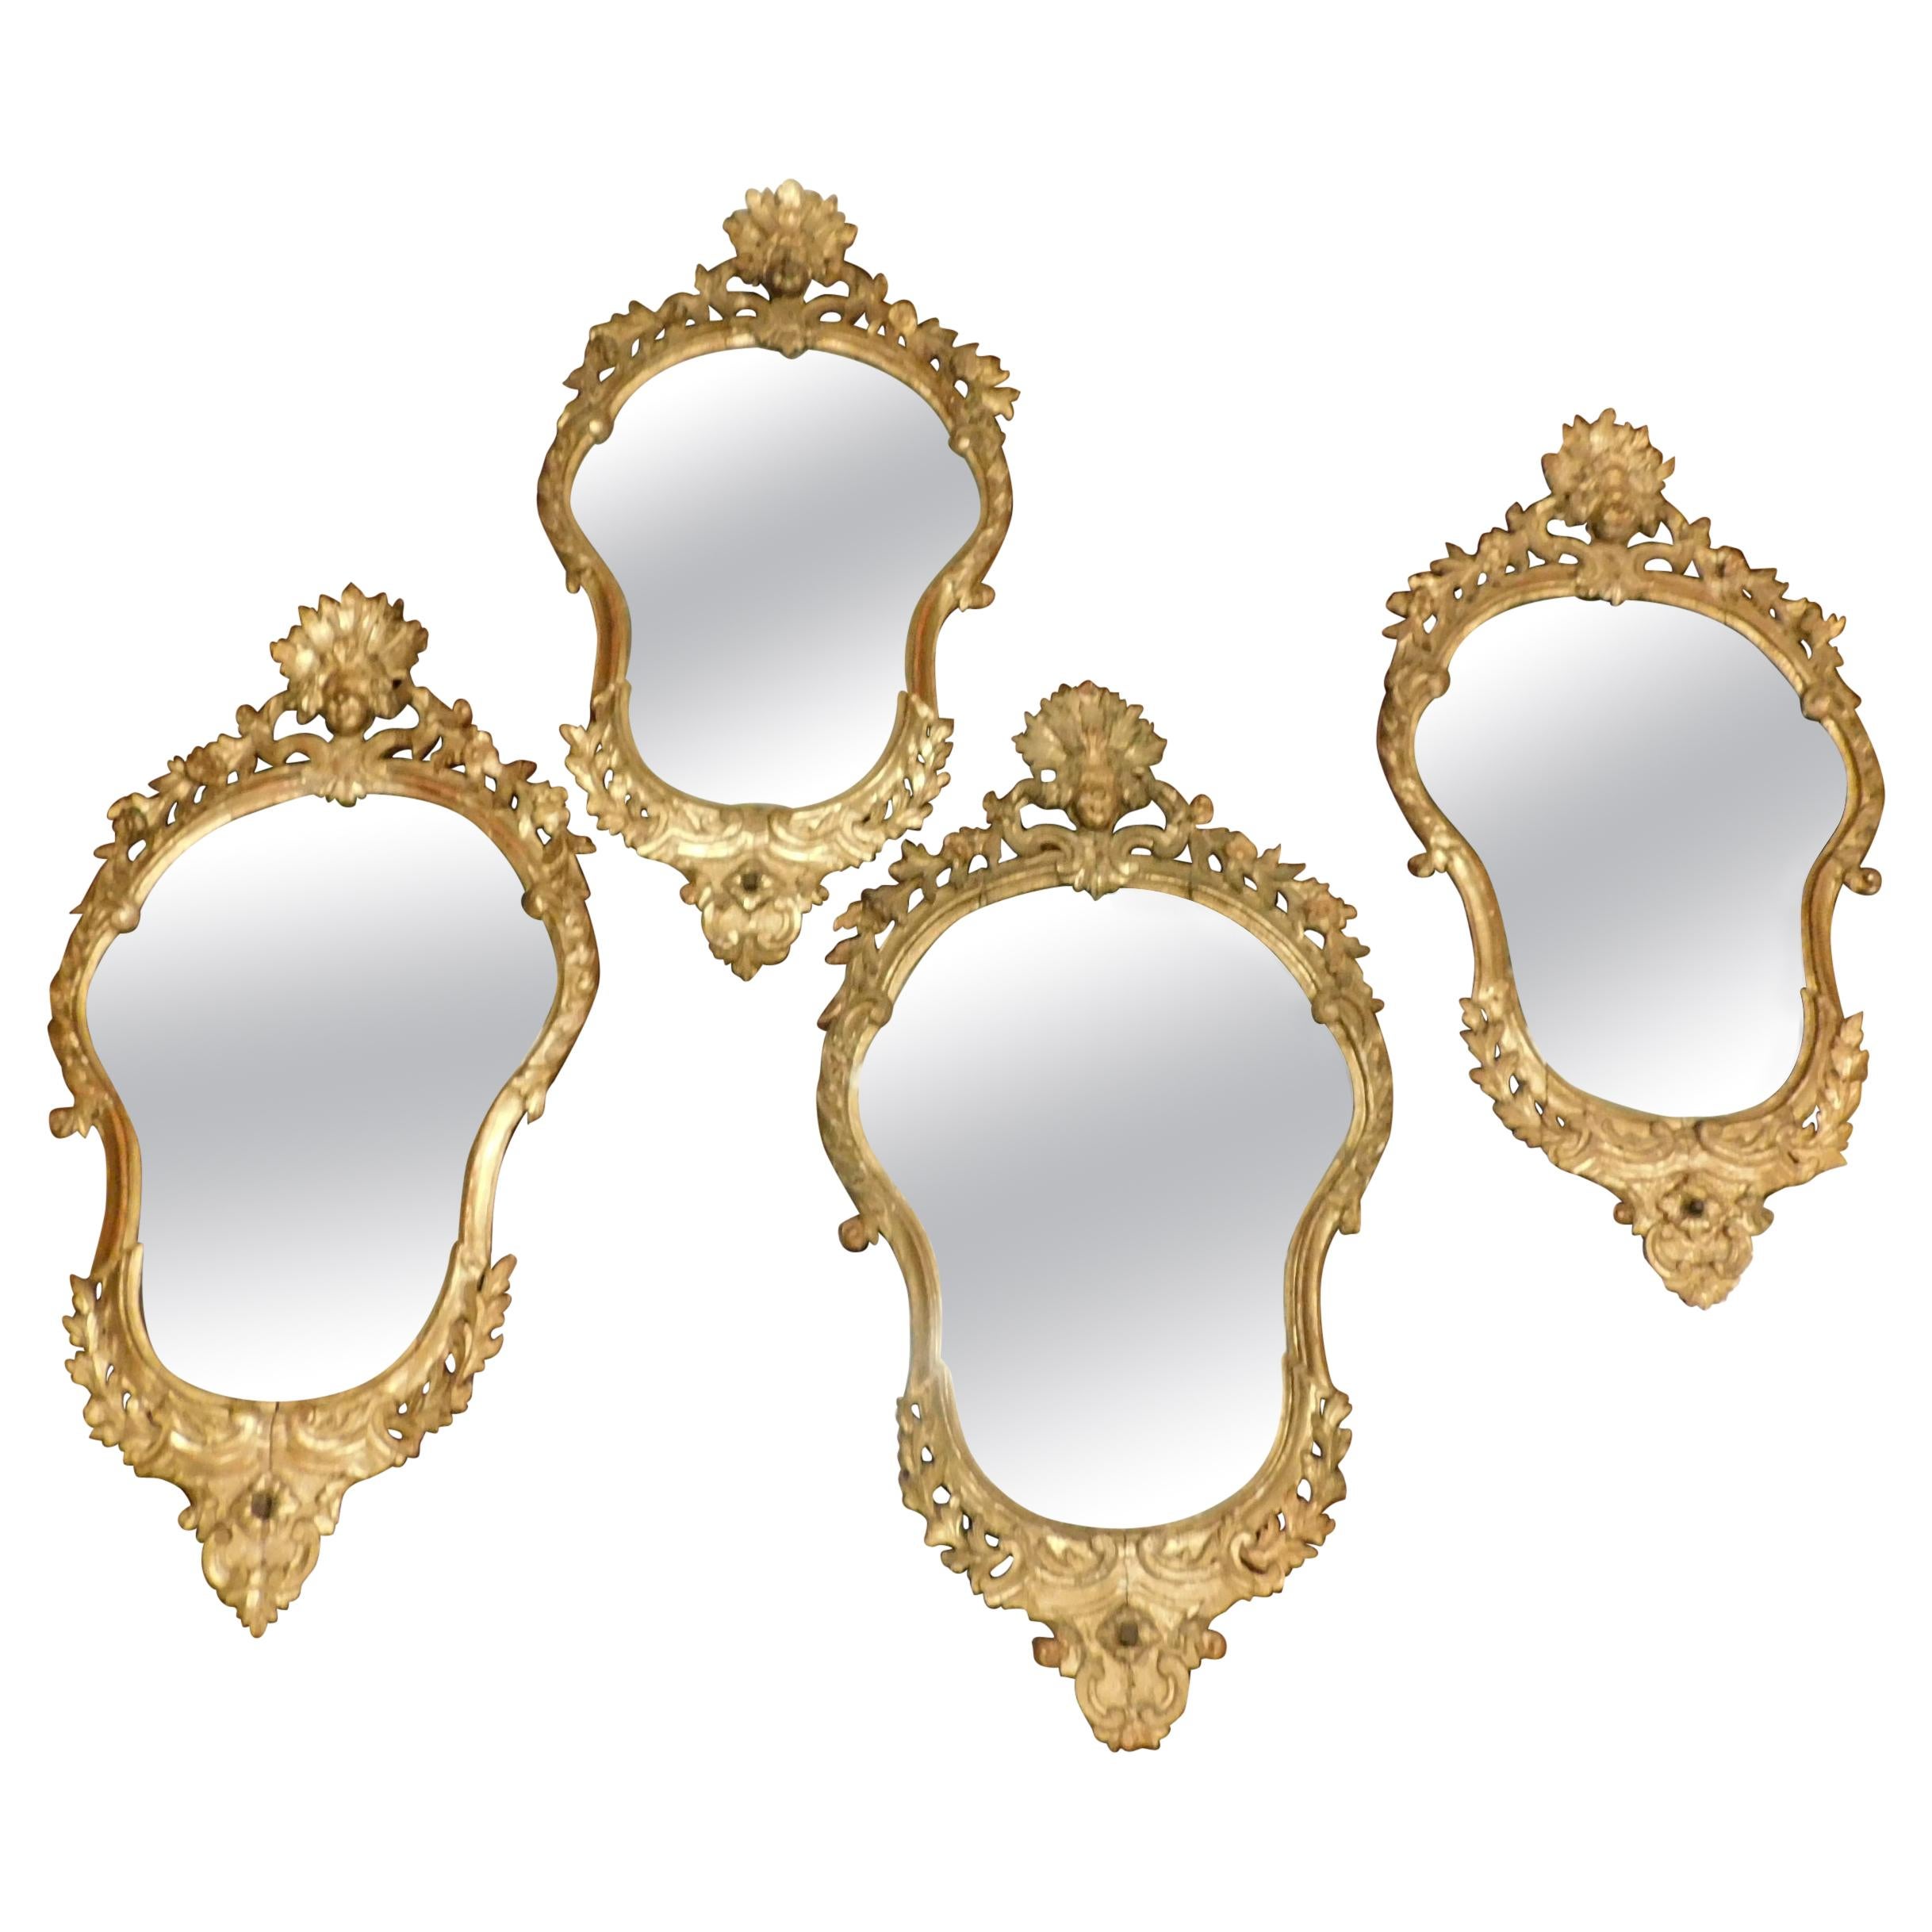 Set of 4 Antique Gilded Mirrors, 18th Century Italy